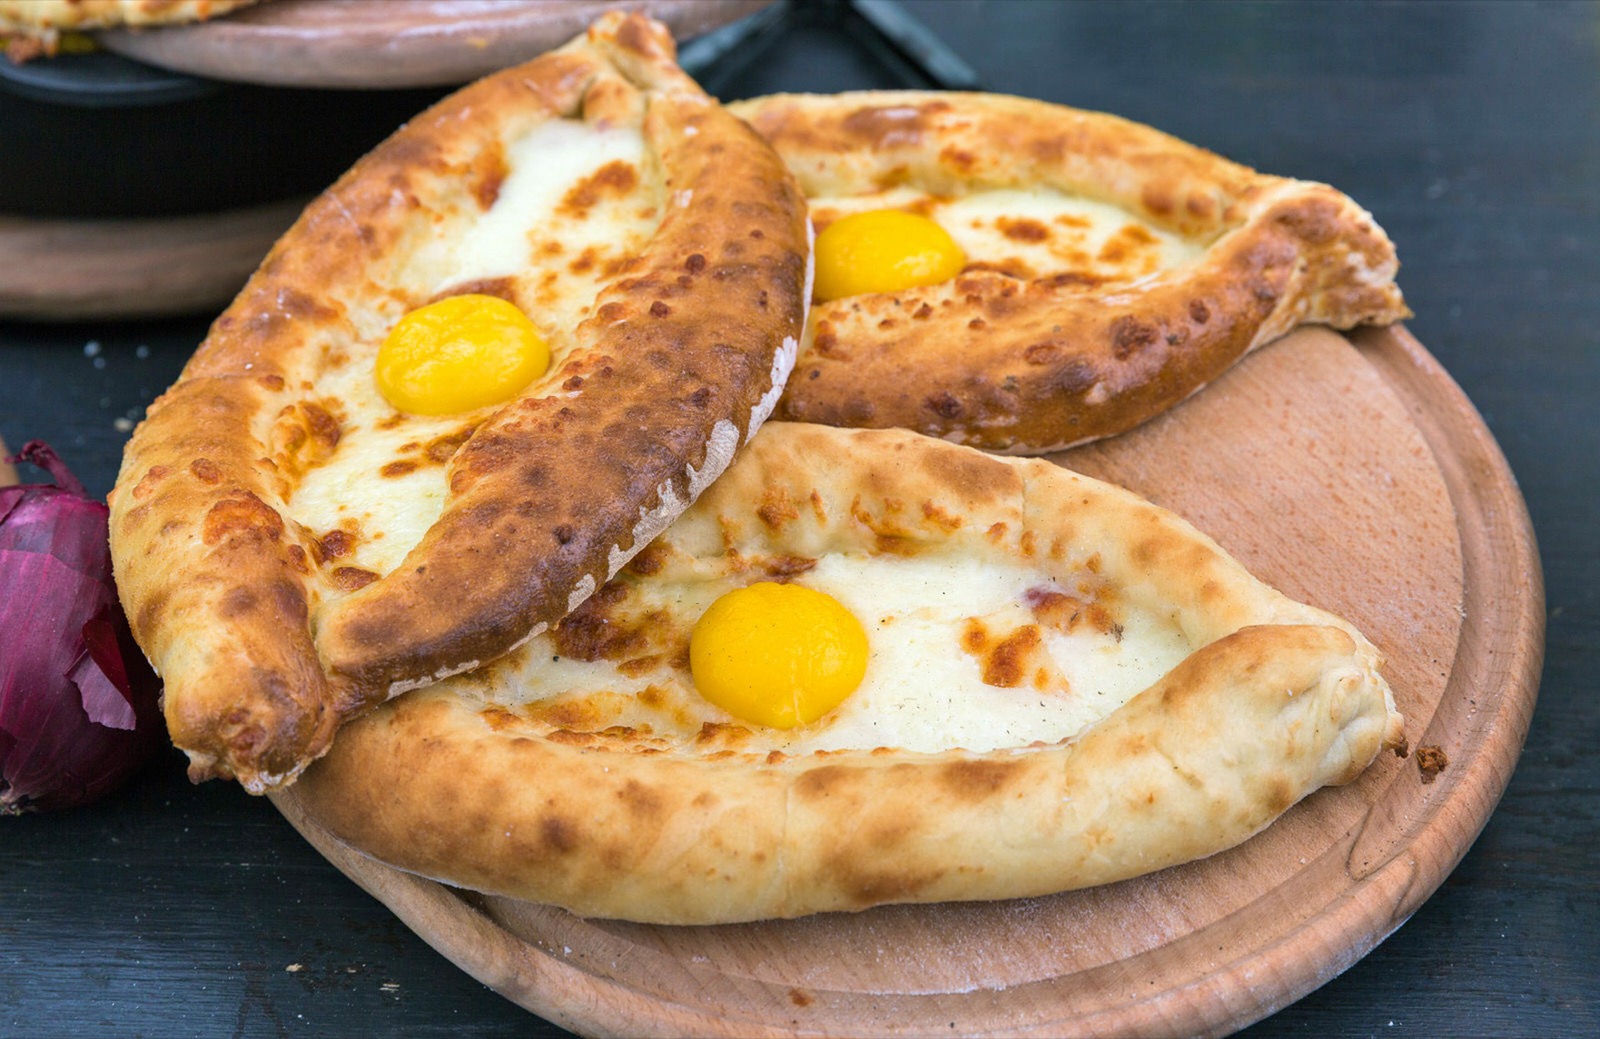 🌭 Here Are 24 Street Foods Around the World – Can You Match Them to Their Continent? Khachapuri (Georgia)